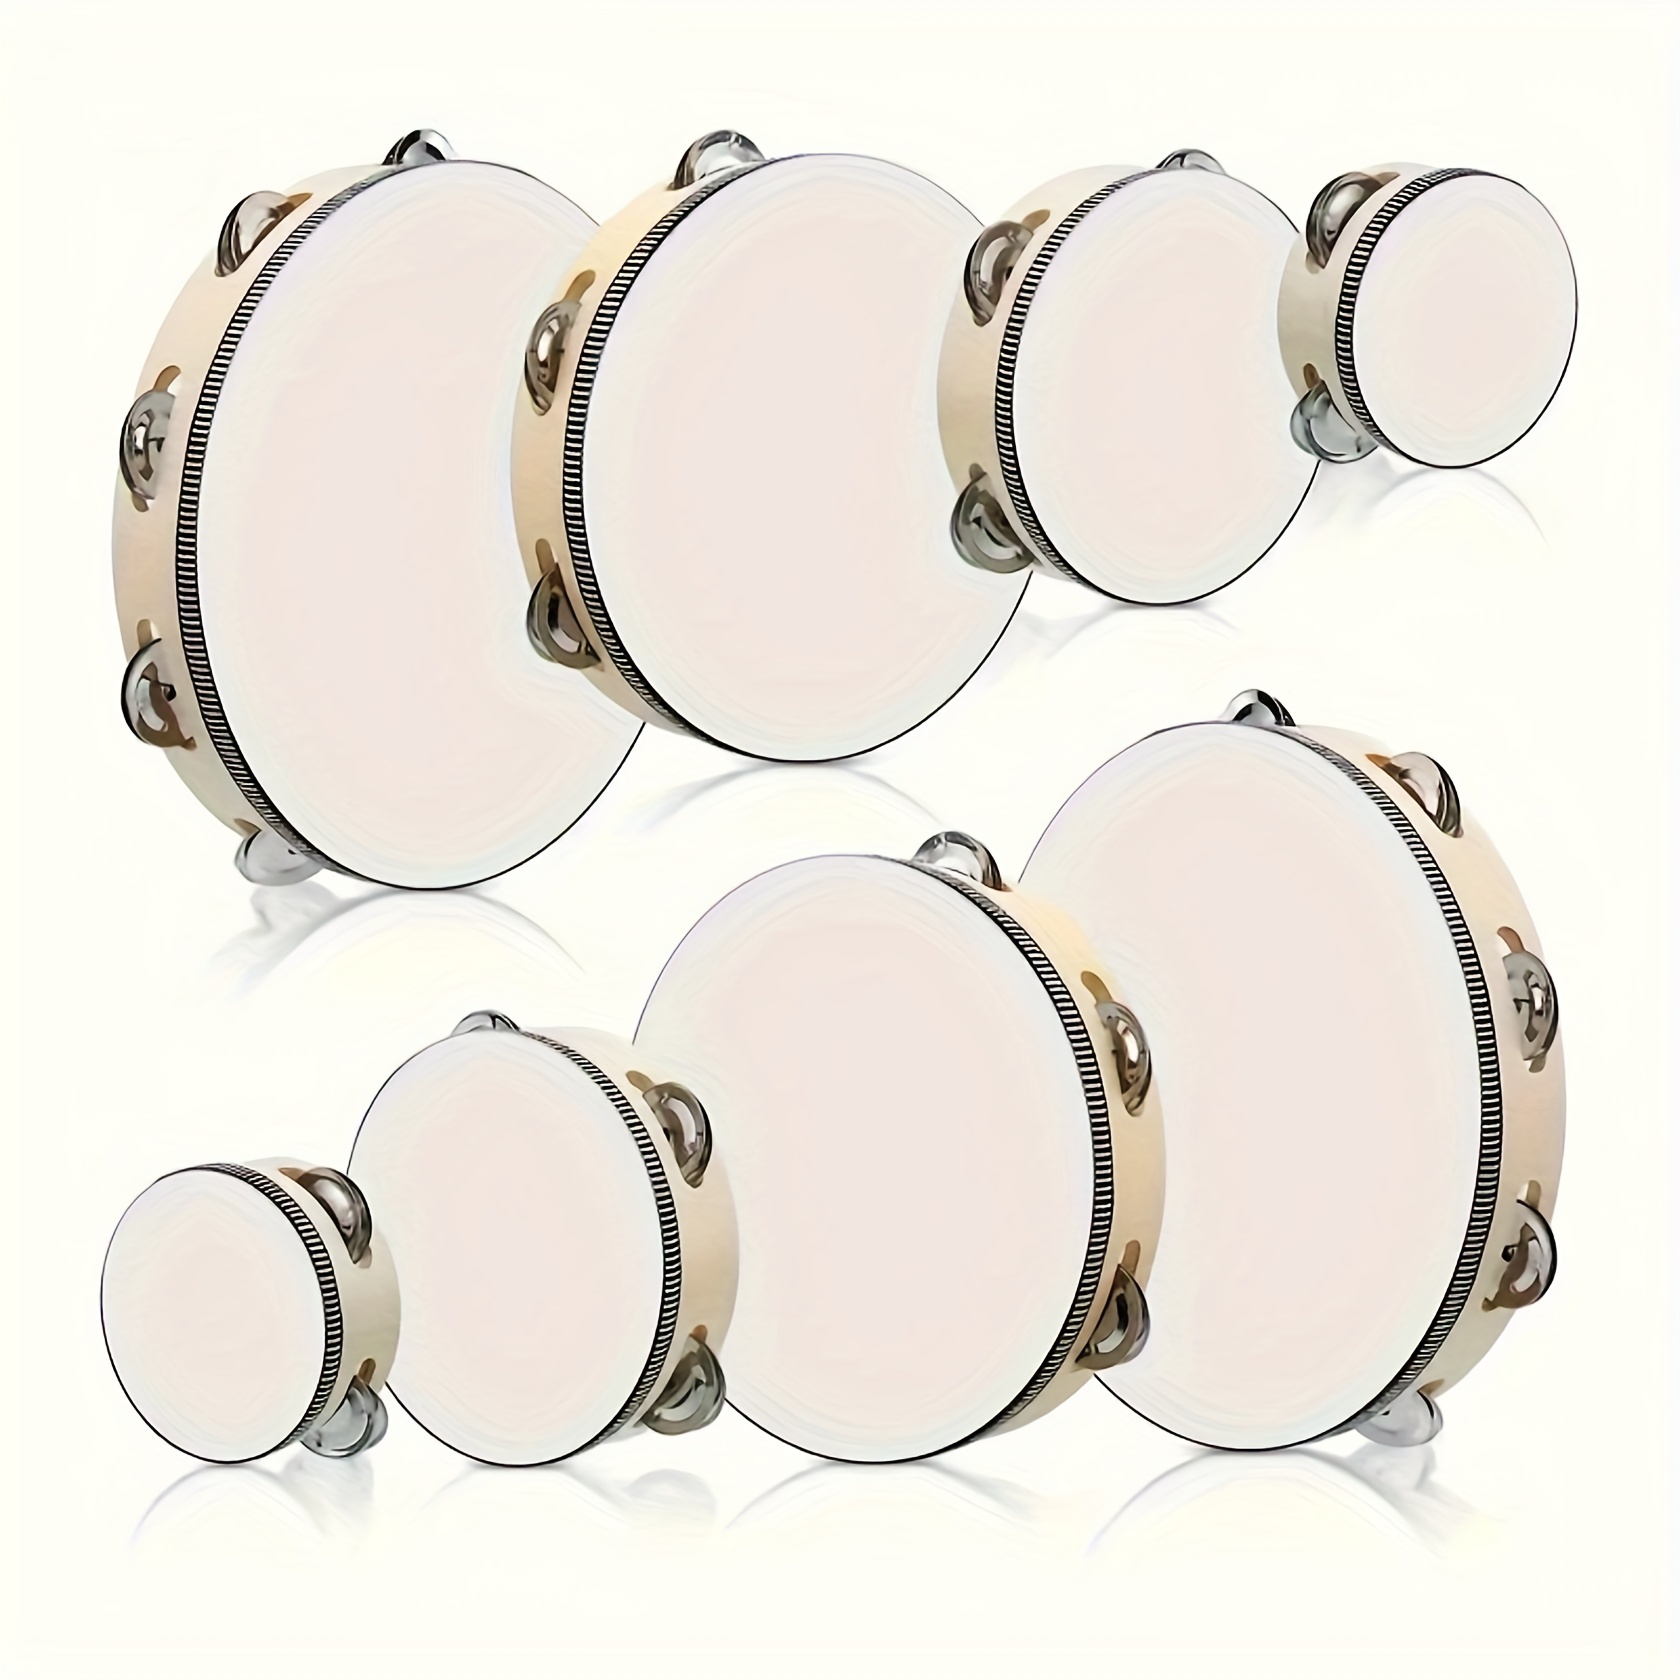 

Premium Double Row Tambourine Set - 6", 8", 10" Wooden Handheld Drums With Metal Jingles, Perfect For Percussionists & Diy Projects Drum Accessories Percussion Instruments